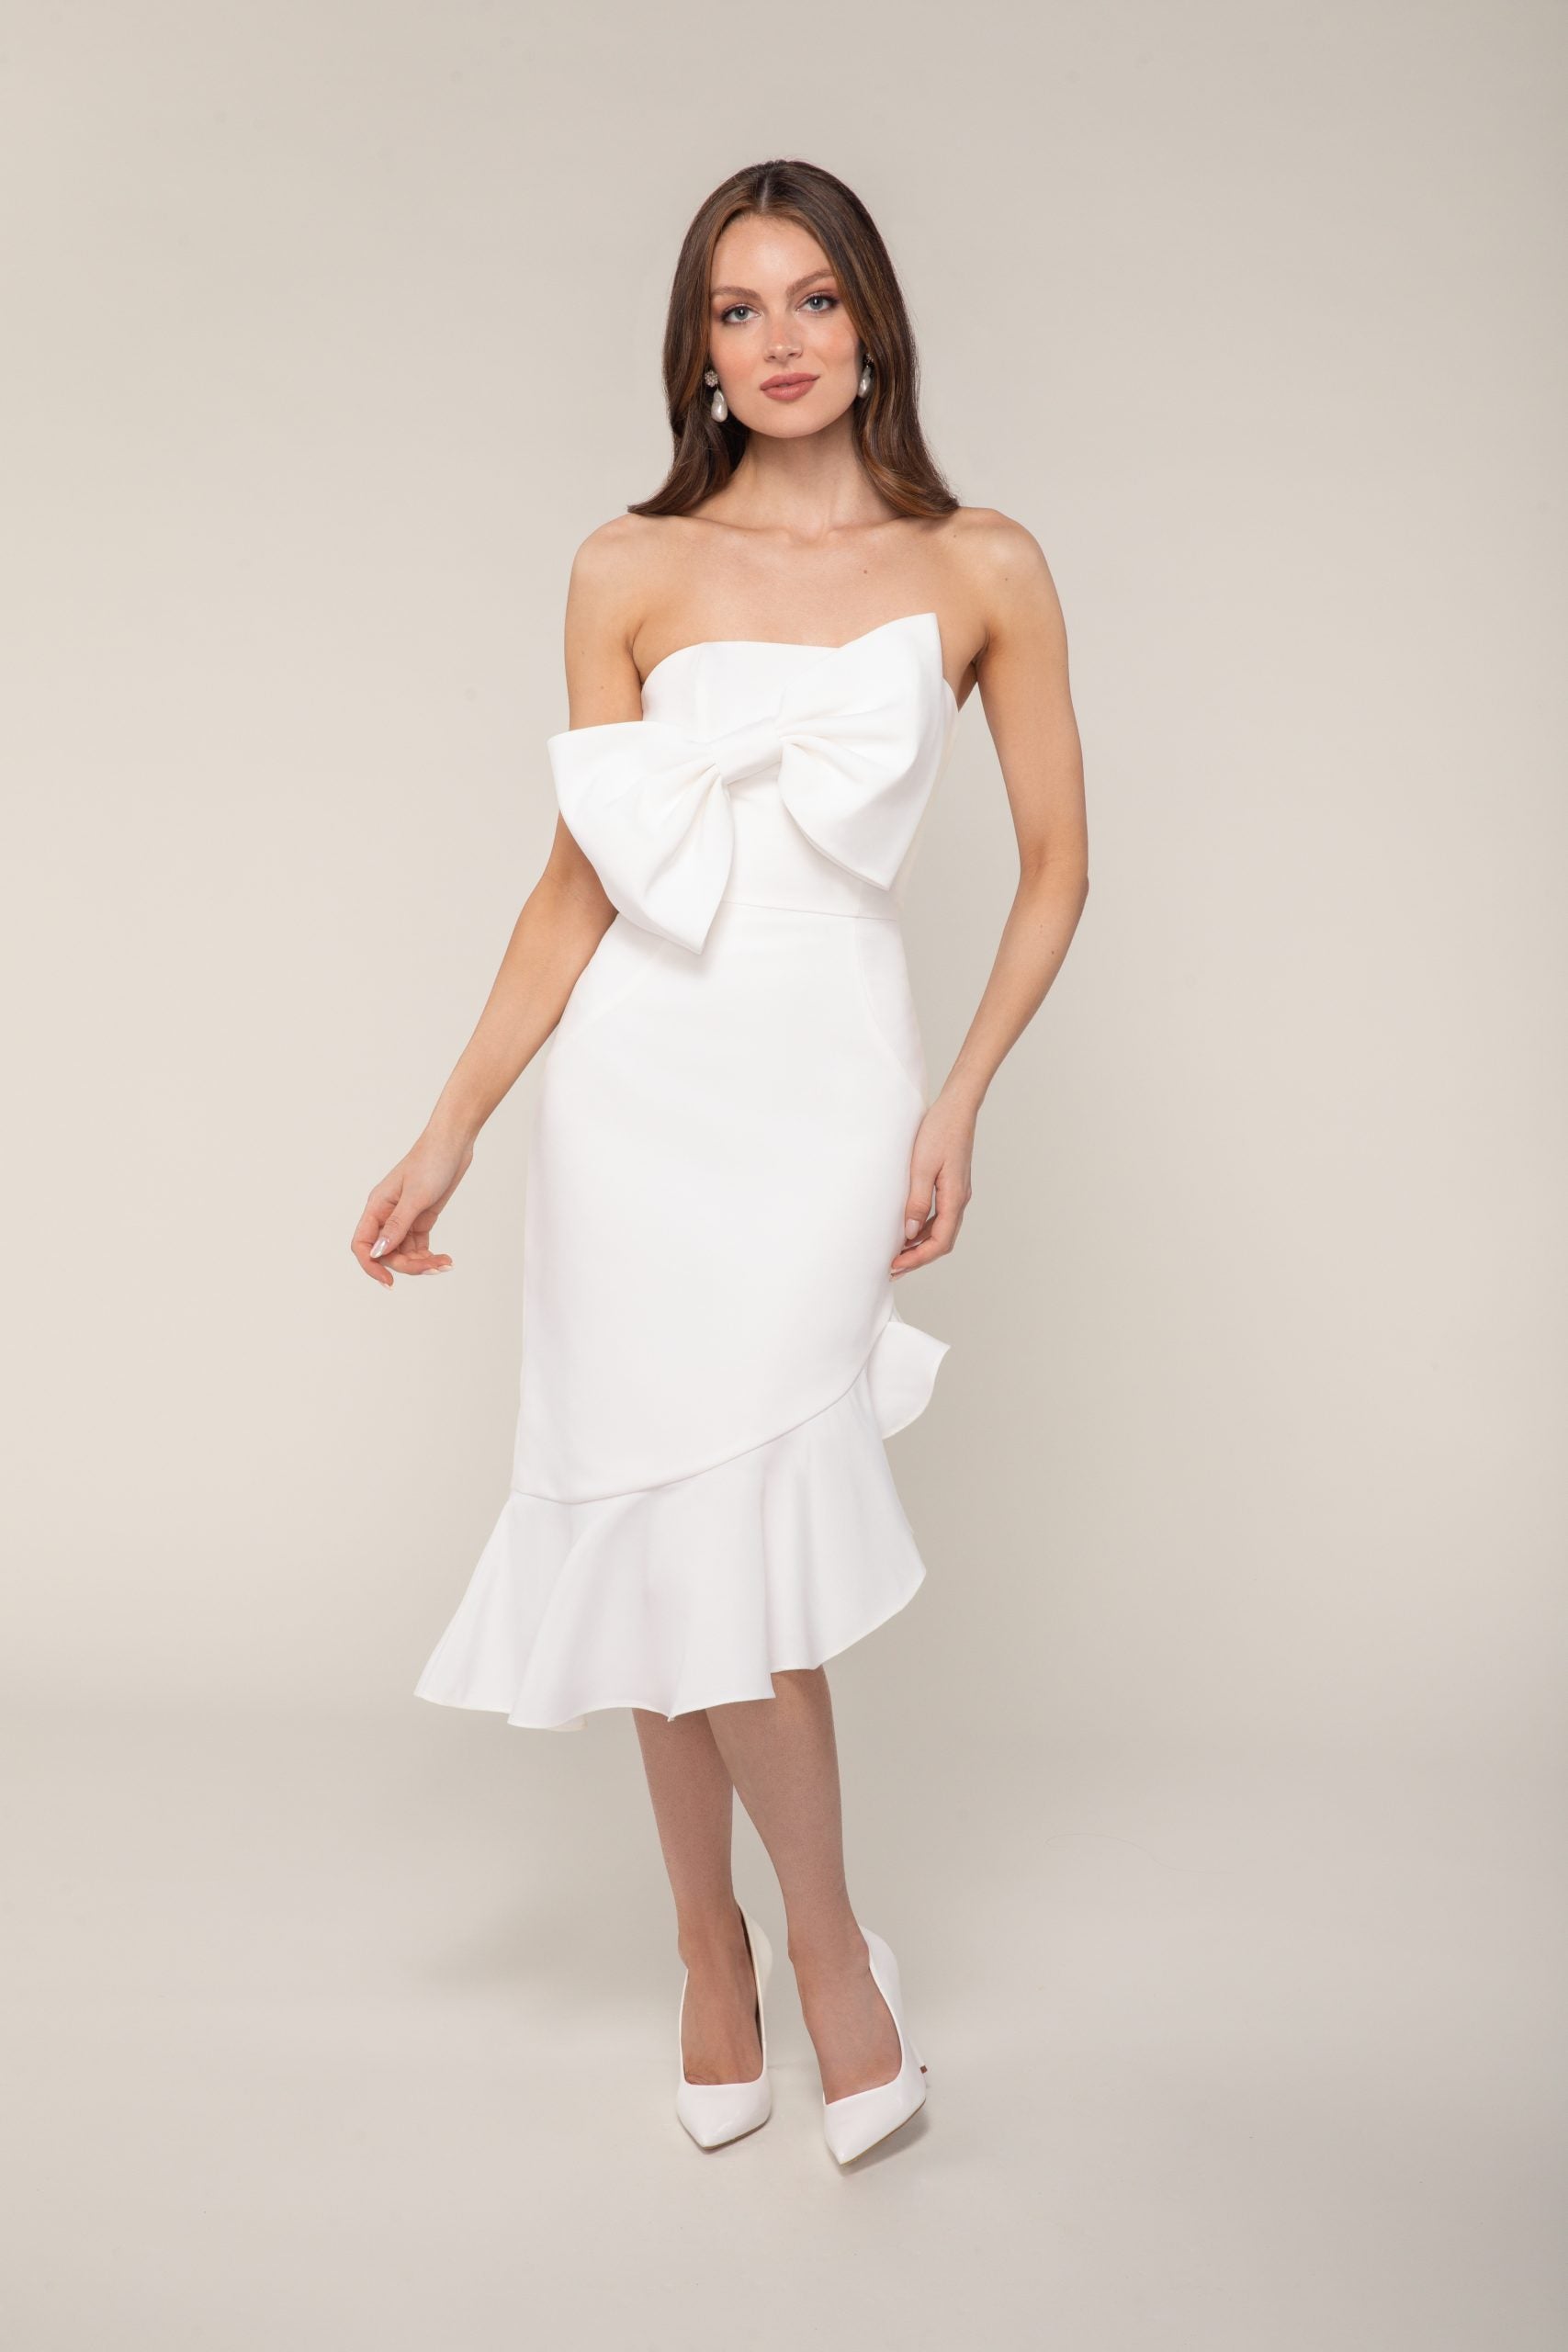 Straight Across Neckline Midi Length Dress Of Faille With An Angular Ruffle At The Hem And Dramatic Bow At Bust by Anne Barge